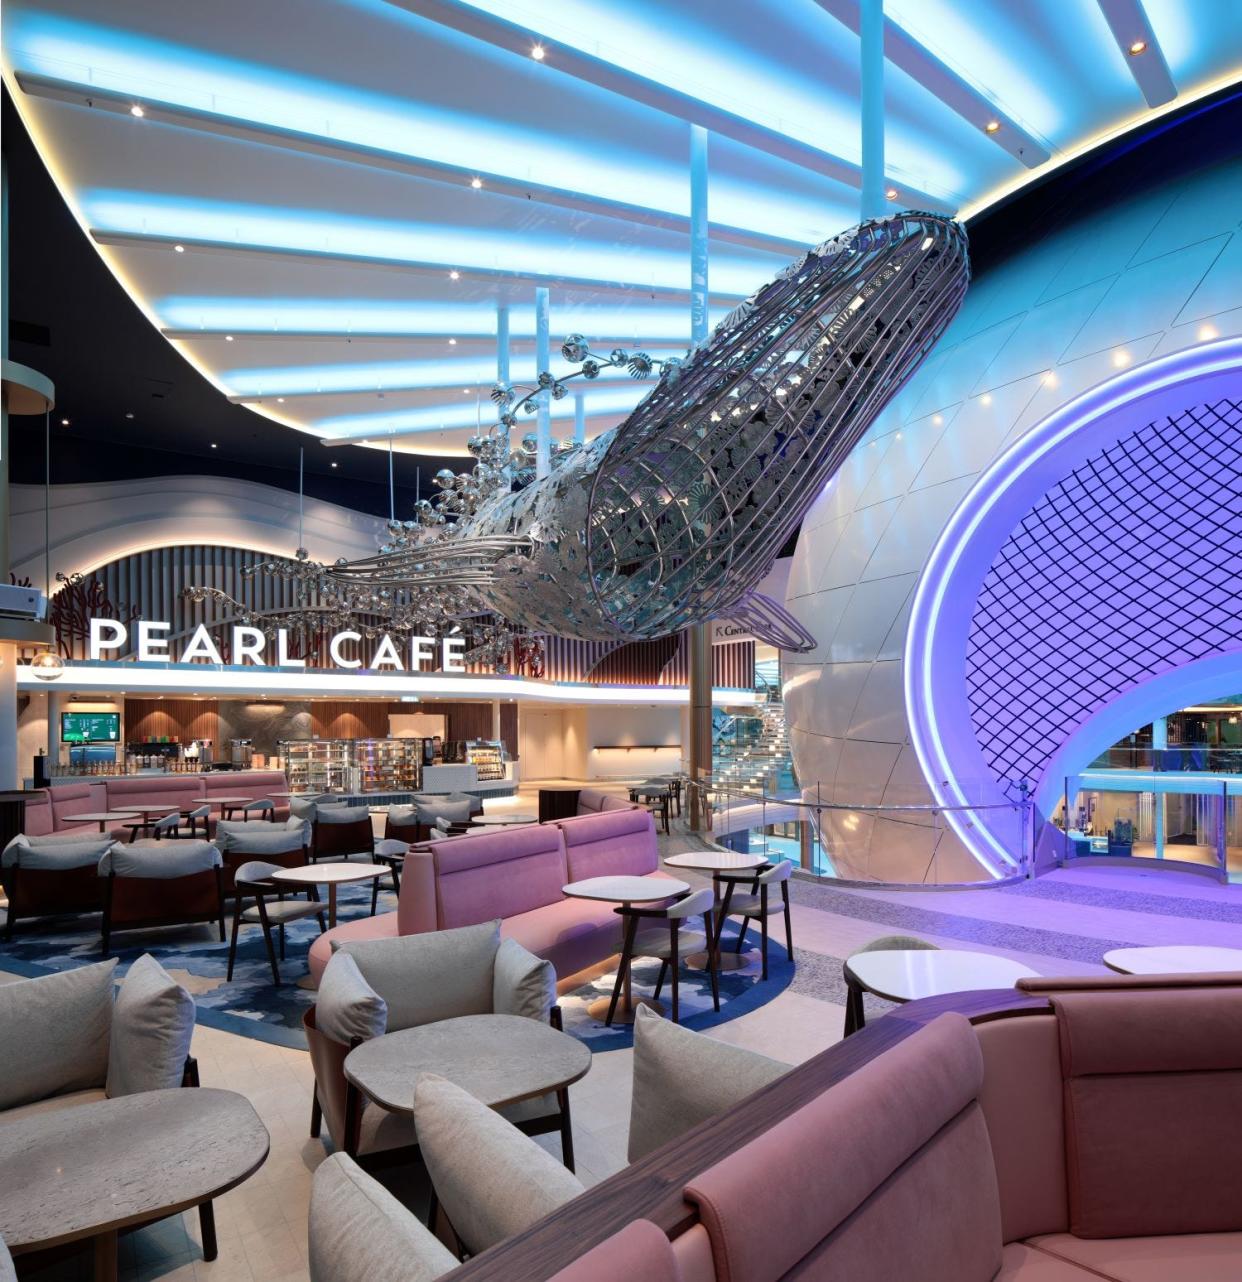 Pearl Cafe is located near The Pearl on Deck 6, underneath a massive whale sculpture.